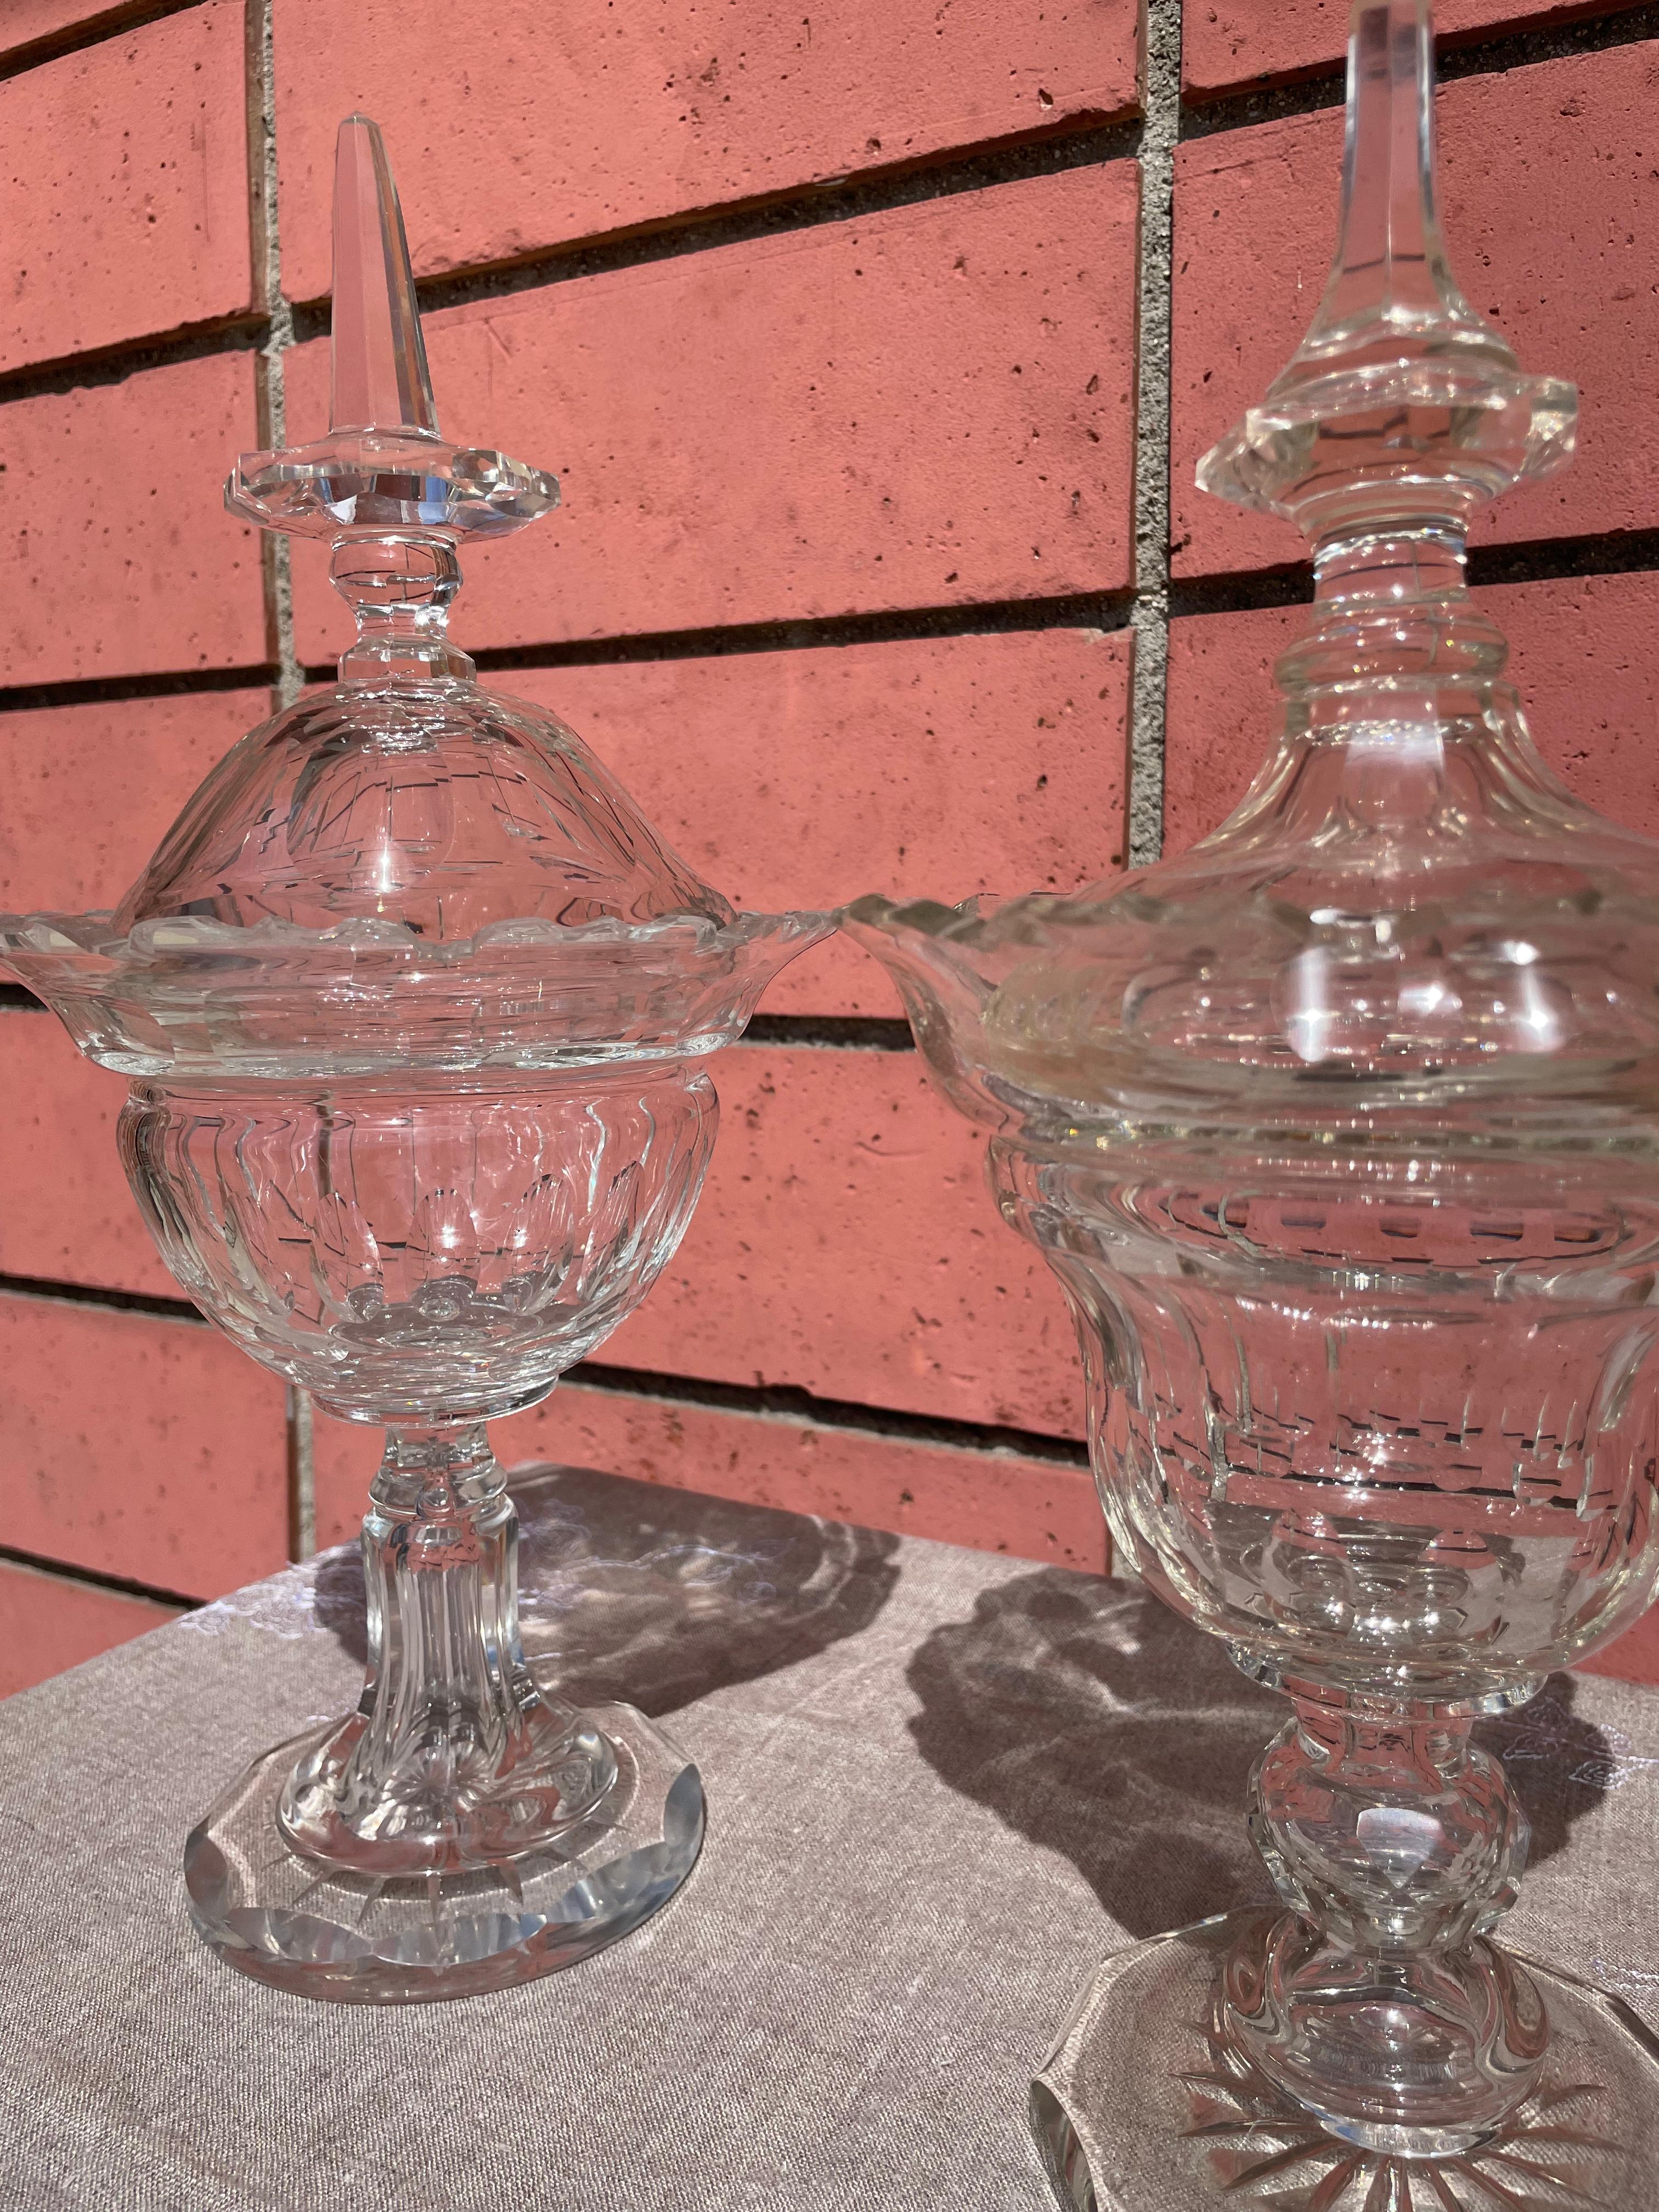 Exquisite Vintage Clear Crystal Dishes with Lid! These are adorable Dutch candy/trinket dishes with lids, made of beautifully cut crystal. This sparkling dish measures 13.5